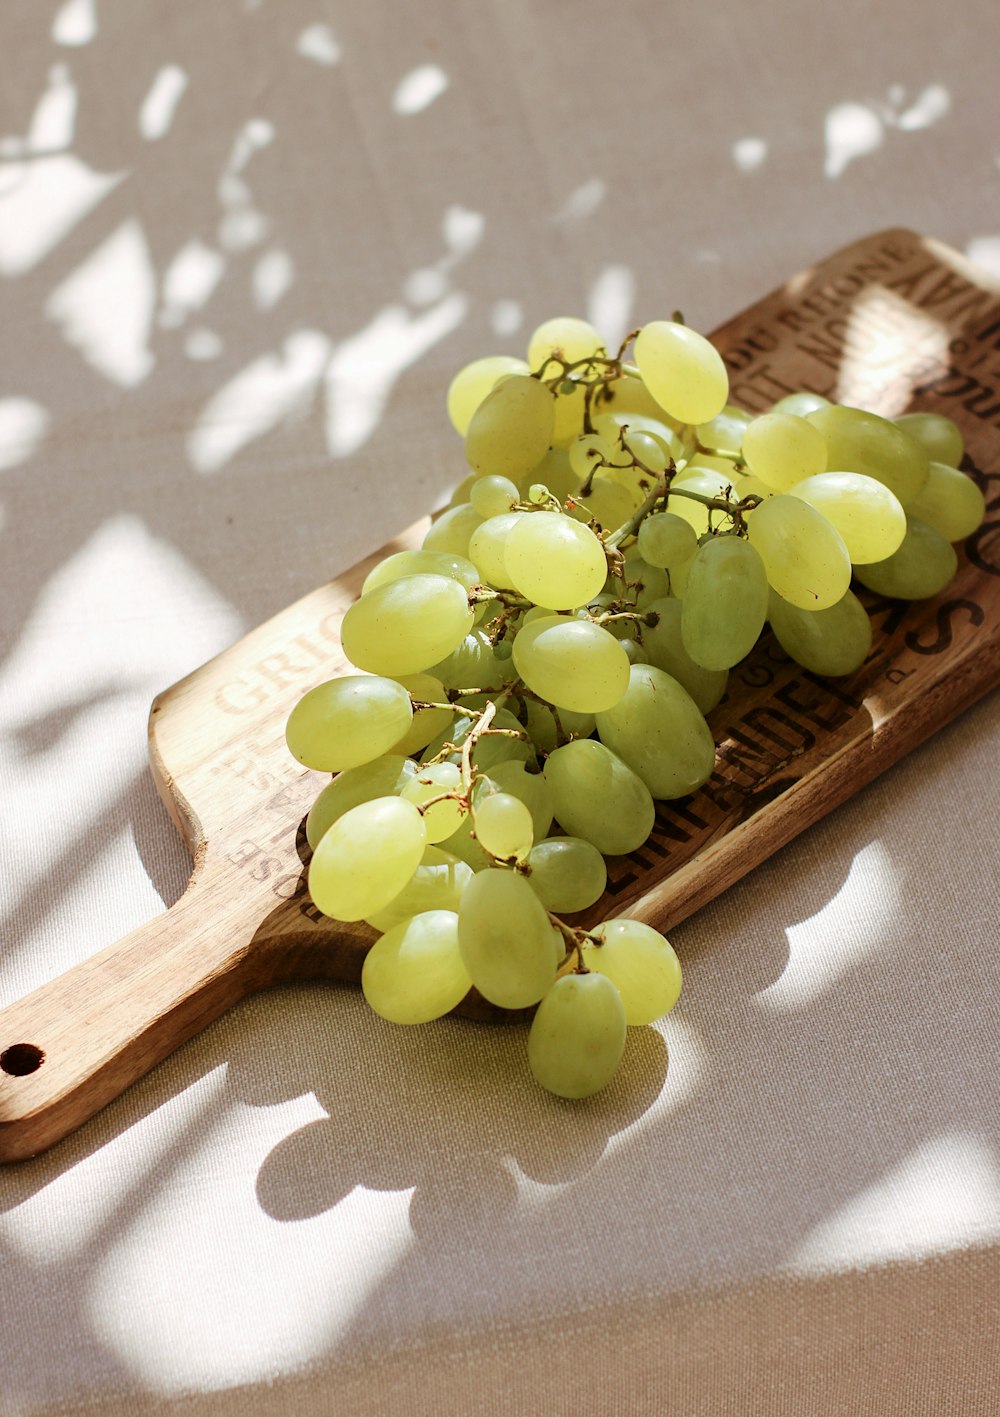 green grapes on brown wooden chopping board